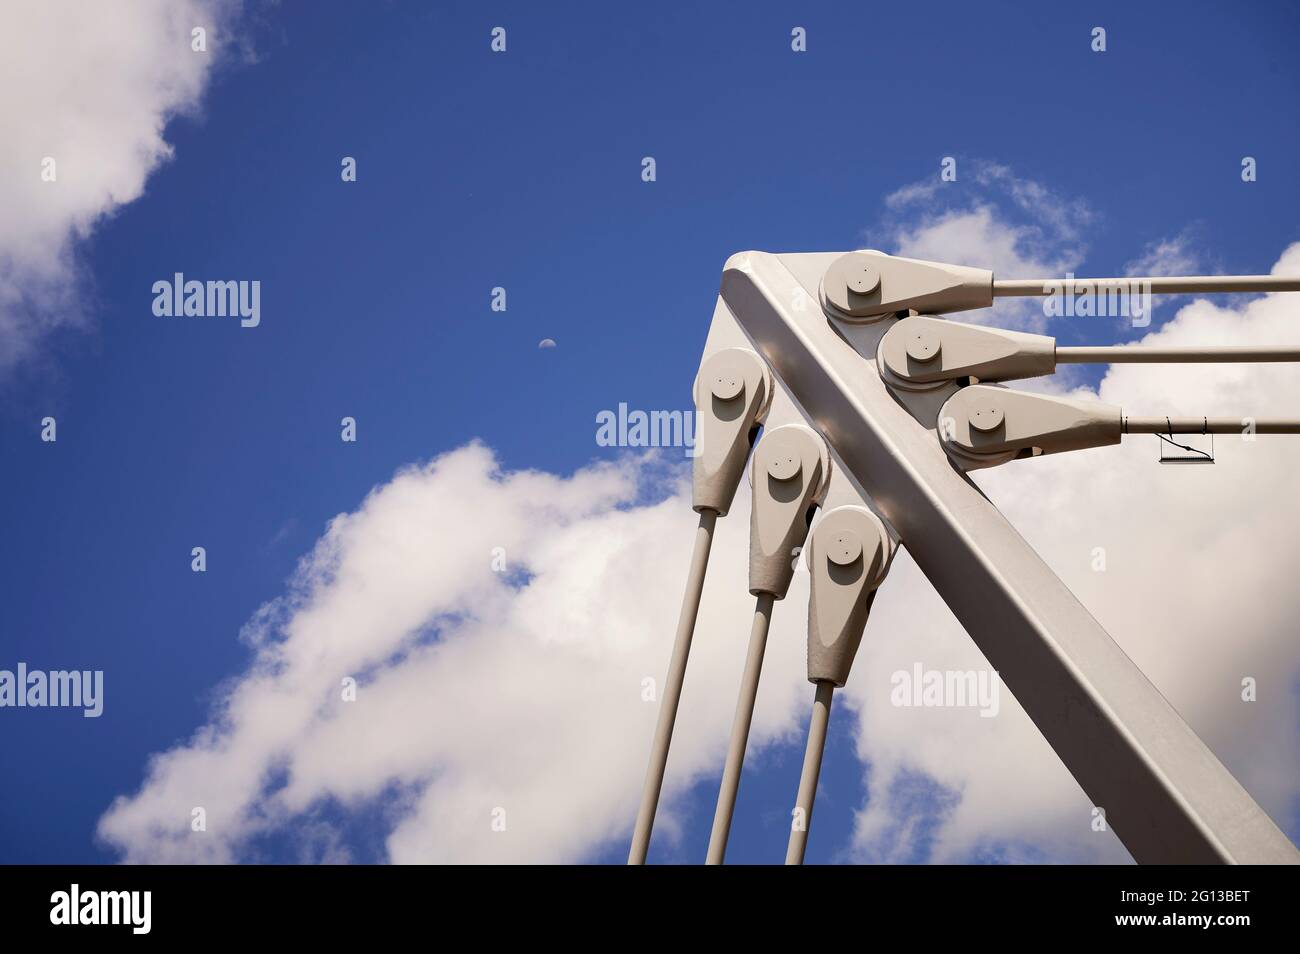 Detail of built structure over blue sky with white clouds. Stock Photo